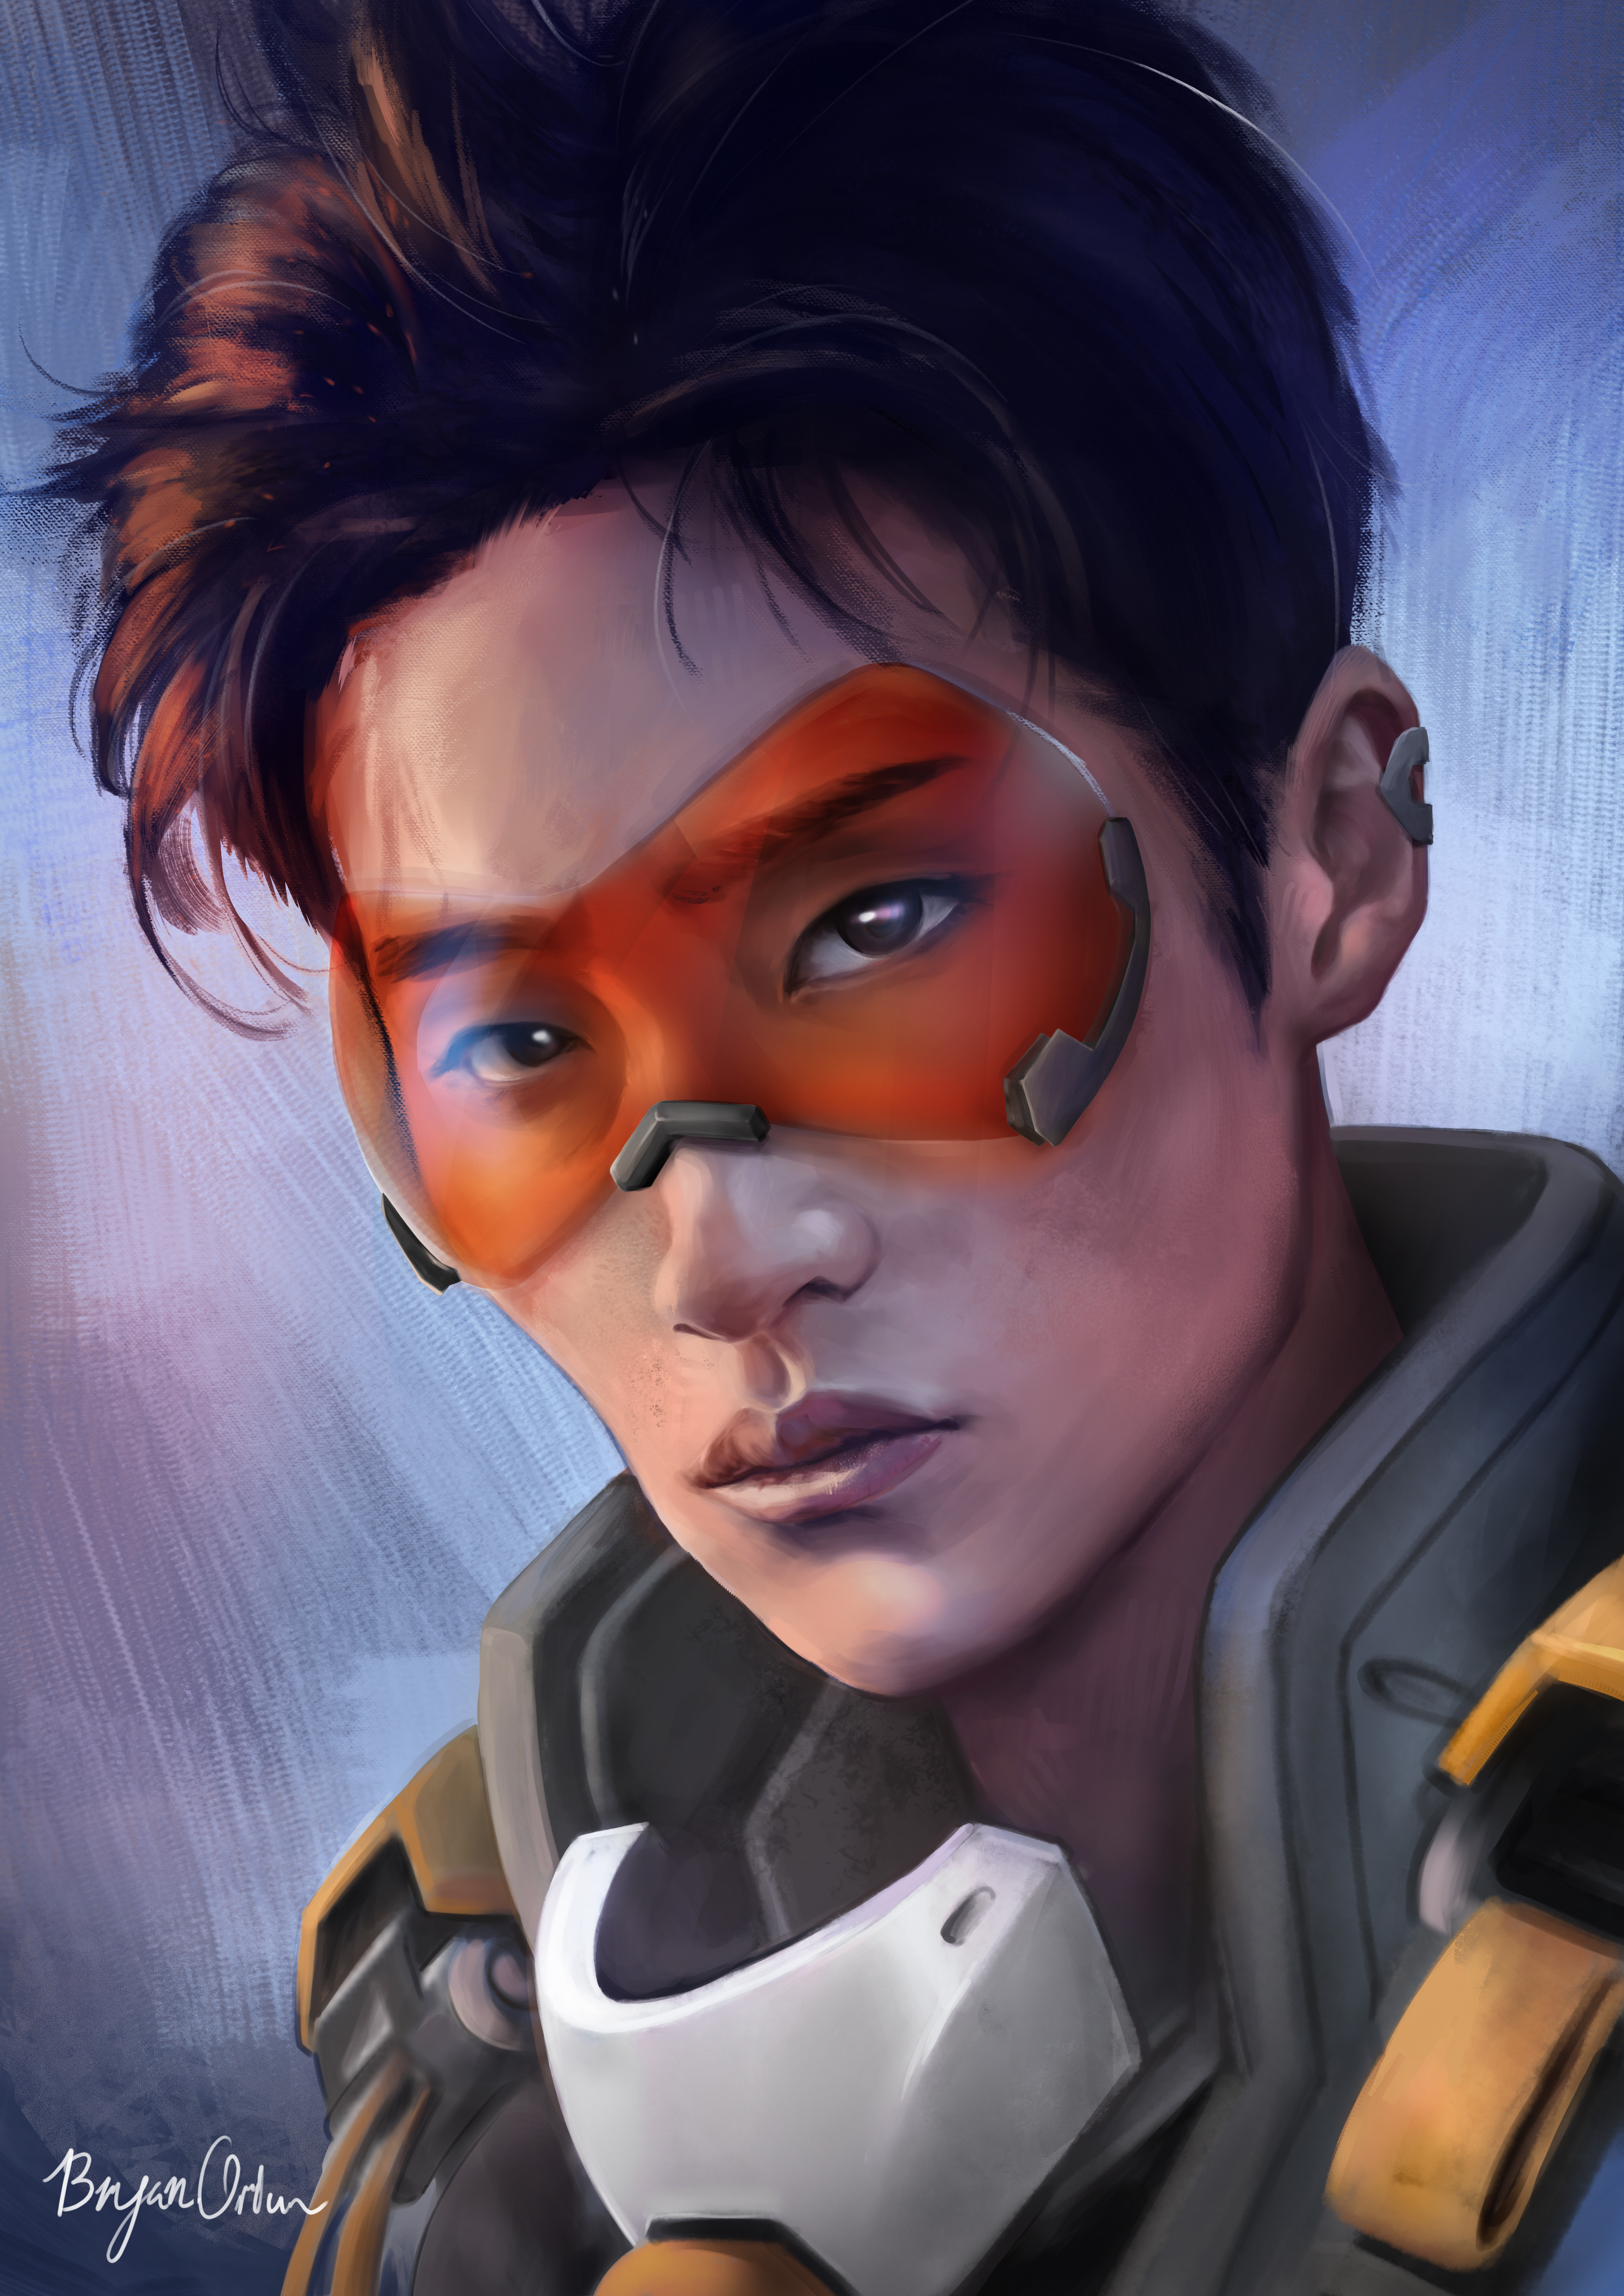 Tracer from overwatch